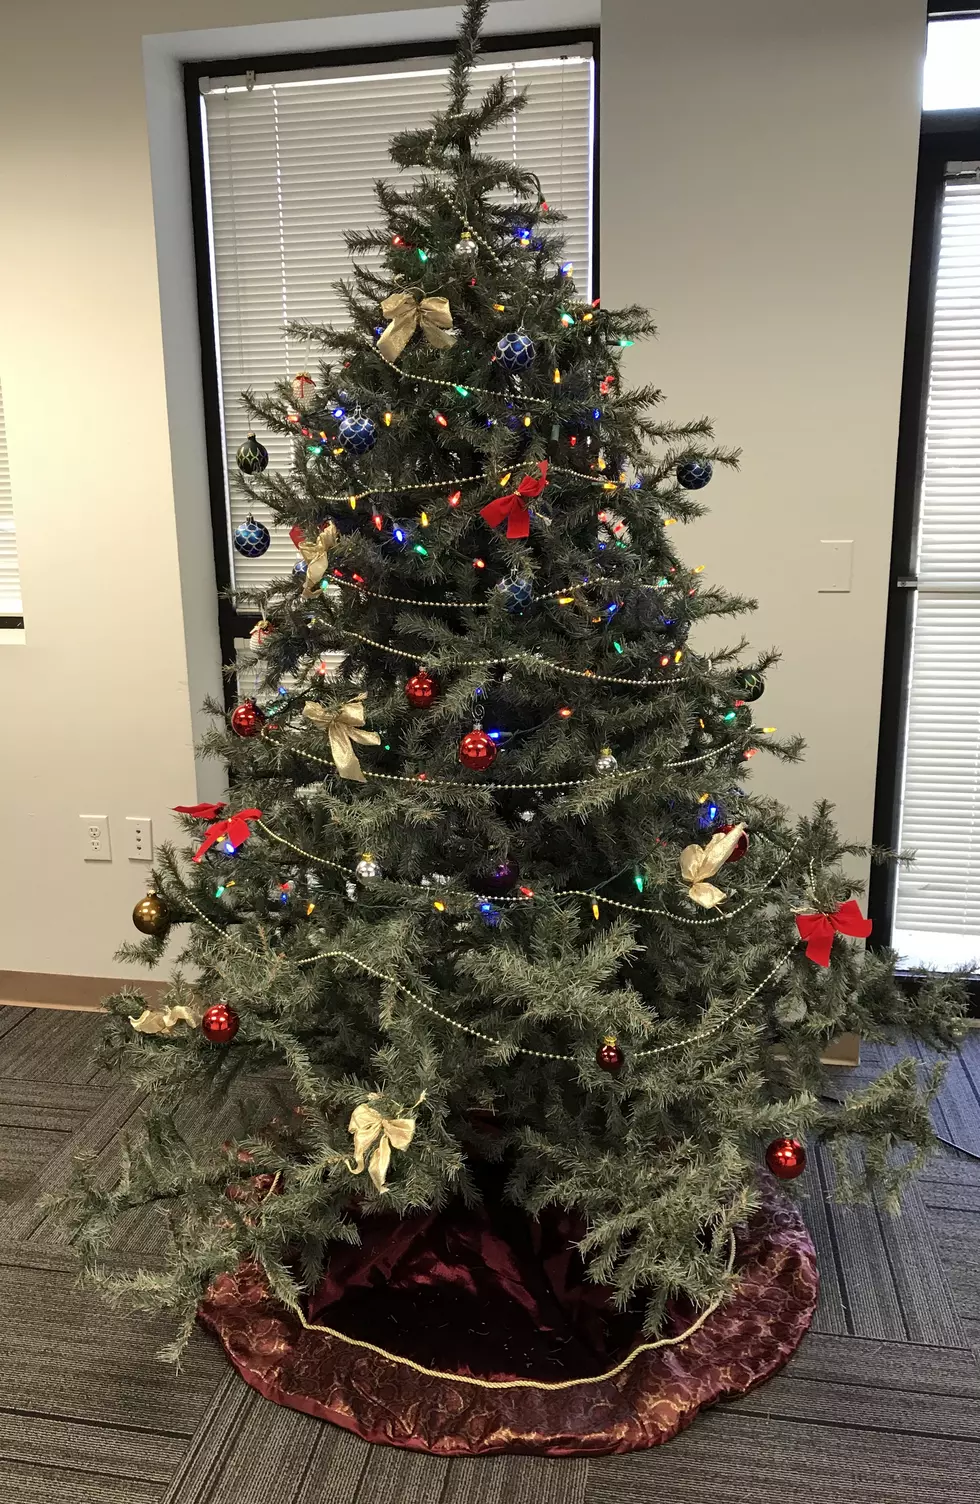 Rate our office Christmas tree